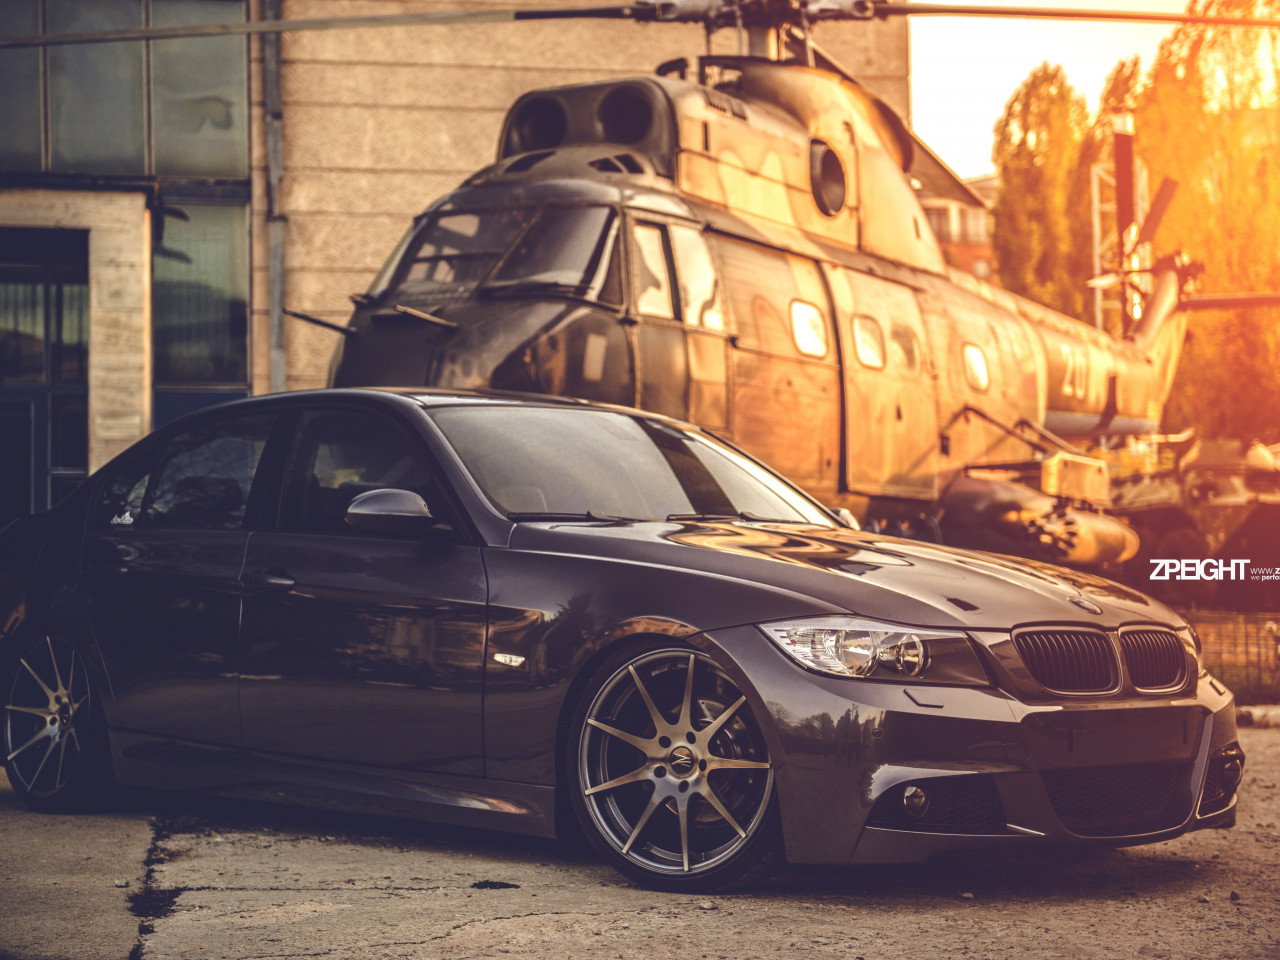 BMW E90 and one helicopter wallpaper 1280x960